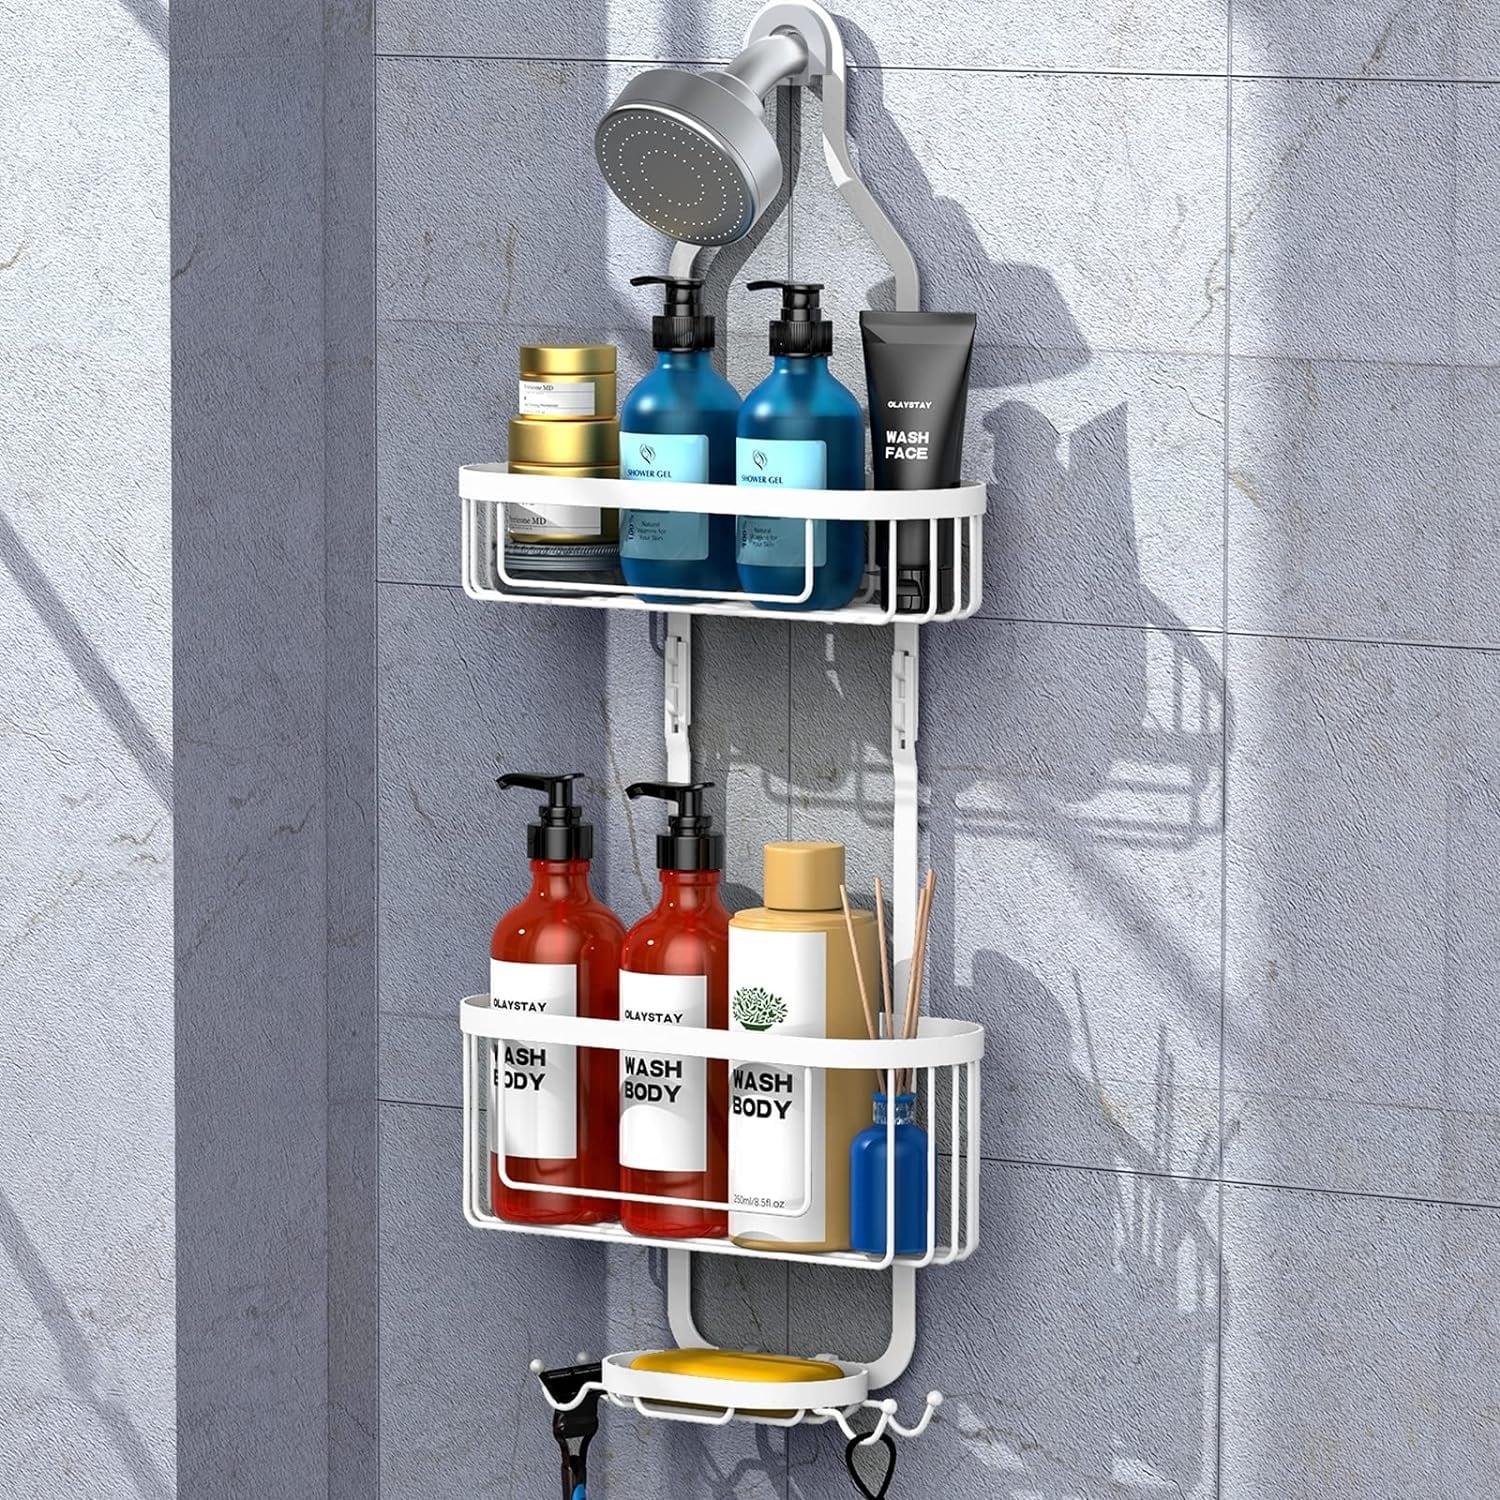 https://ak1.ostkcdn.com/images/products/is/images/direct/aa422f5c5074324def8febb2a055e1a88b662715/Over-Head-Shower-Caddy-Shower-Storage-Rack-Basket-with-Hooks.jpg